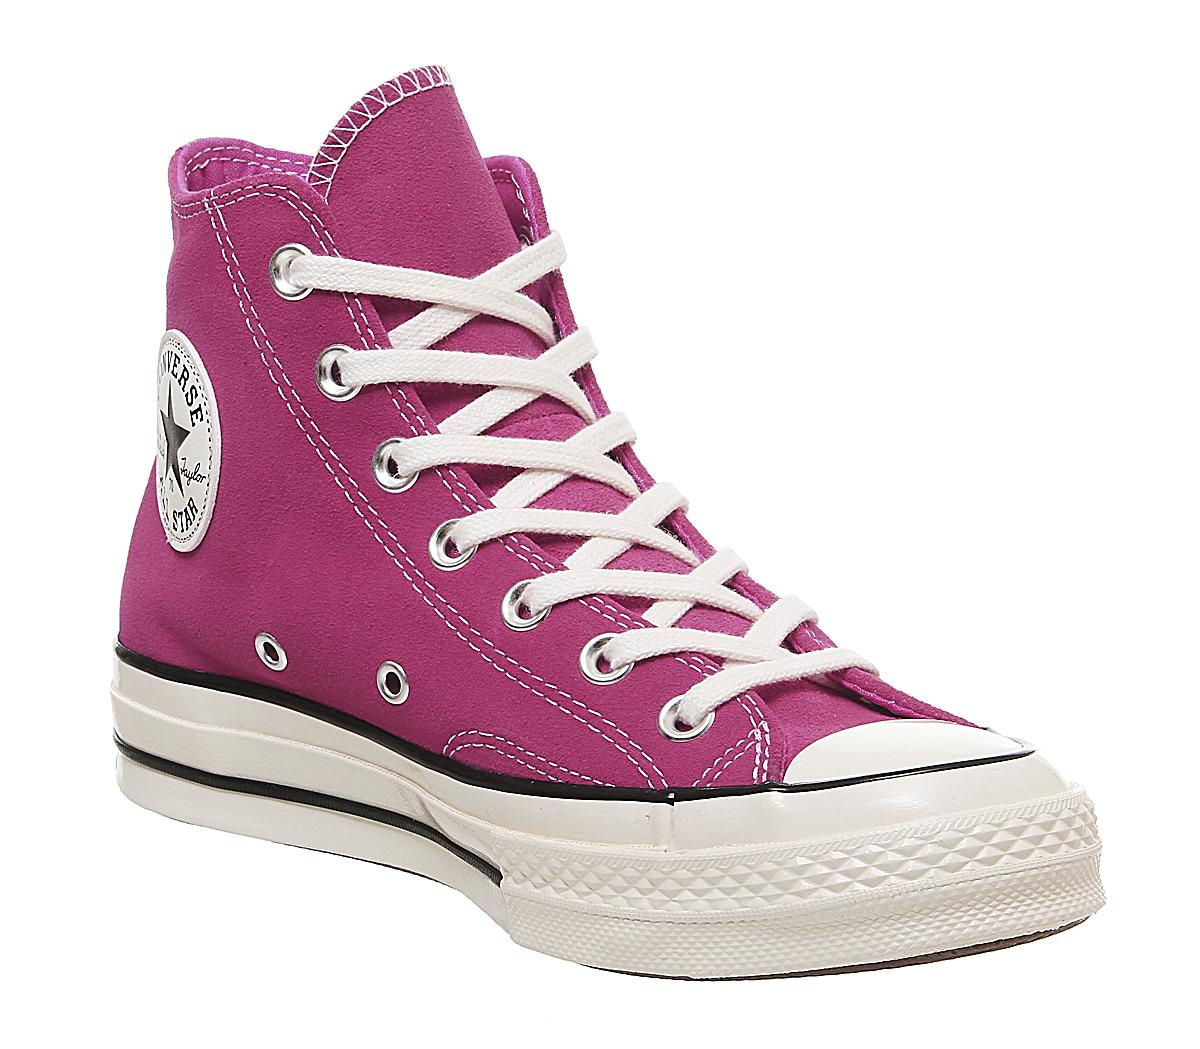 Converse All Star Hi 70s Trainers Prime 